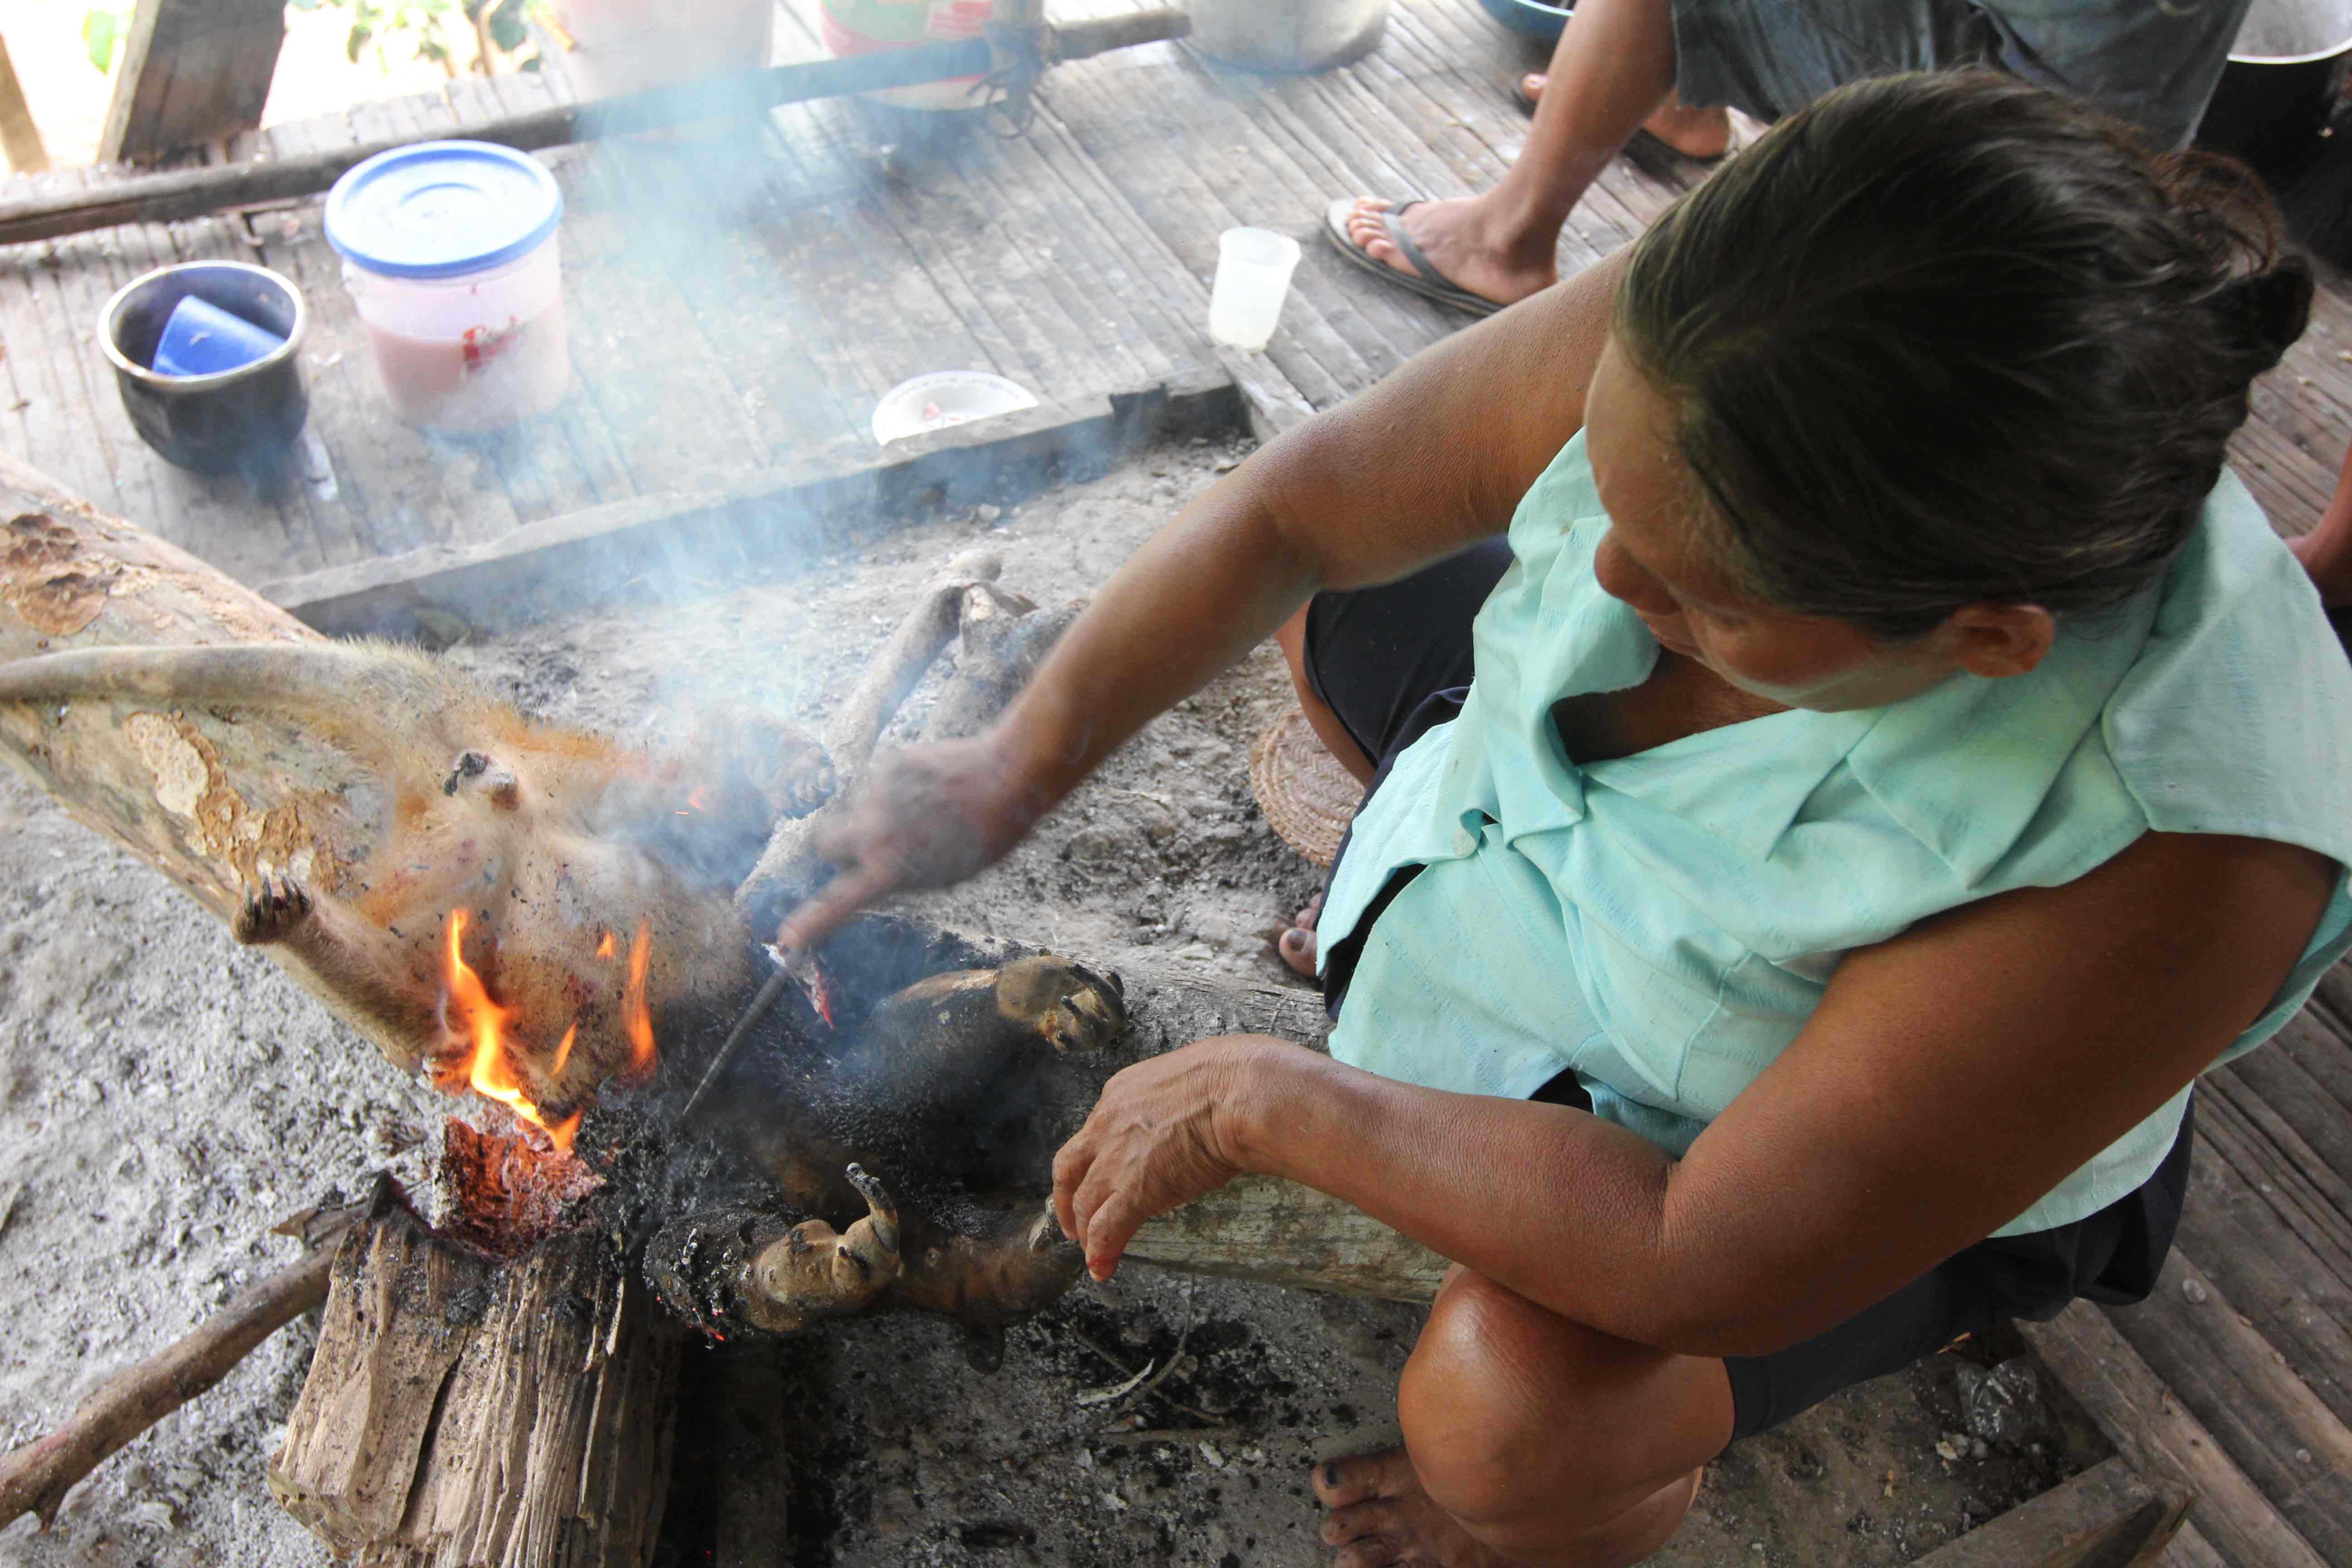 A woman prepares an anteater for supper from the day's catch. Copyright: Barbara Fraser.